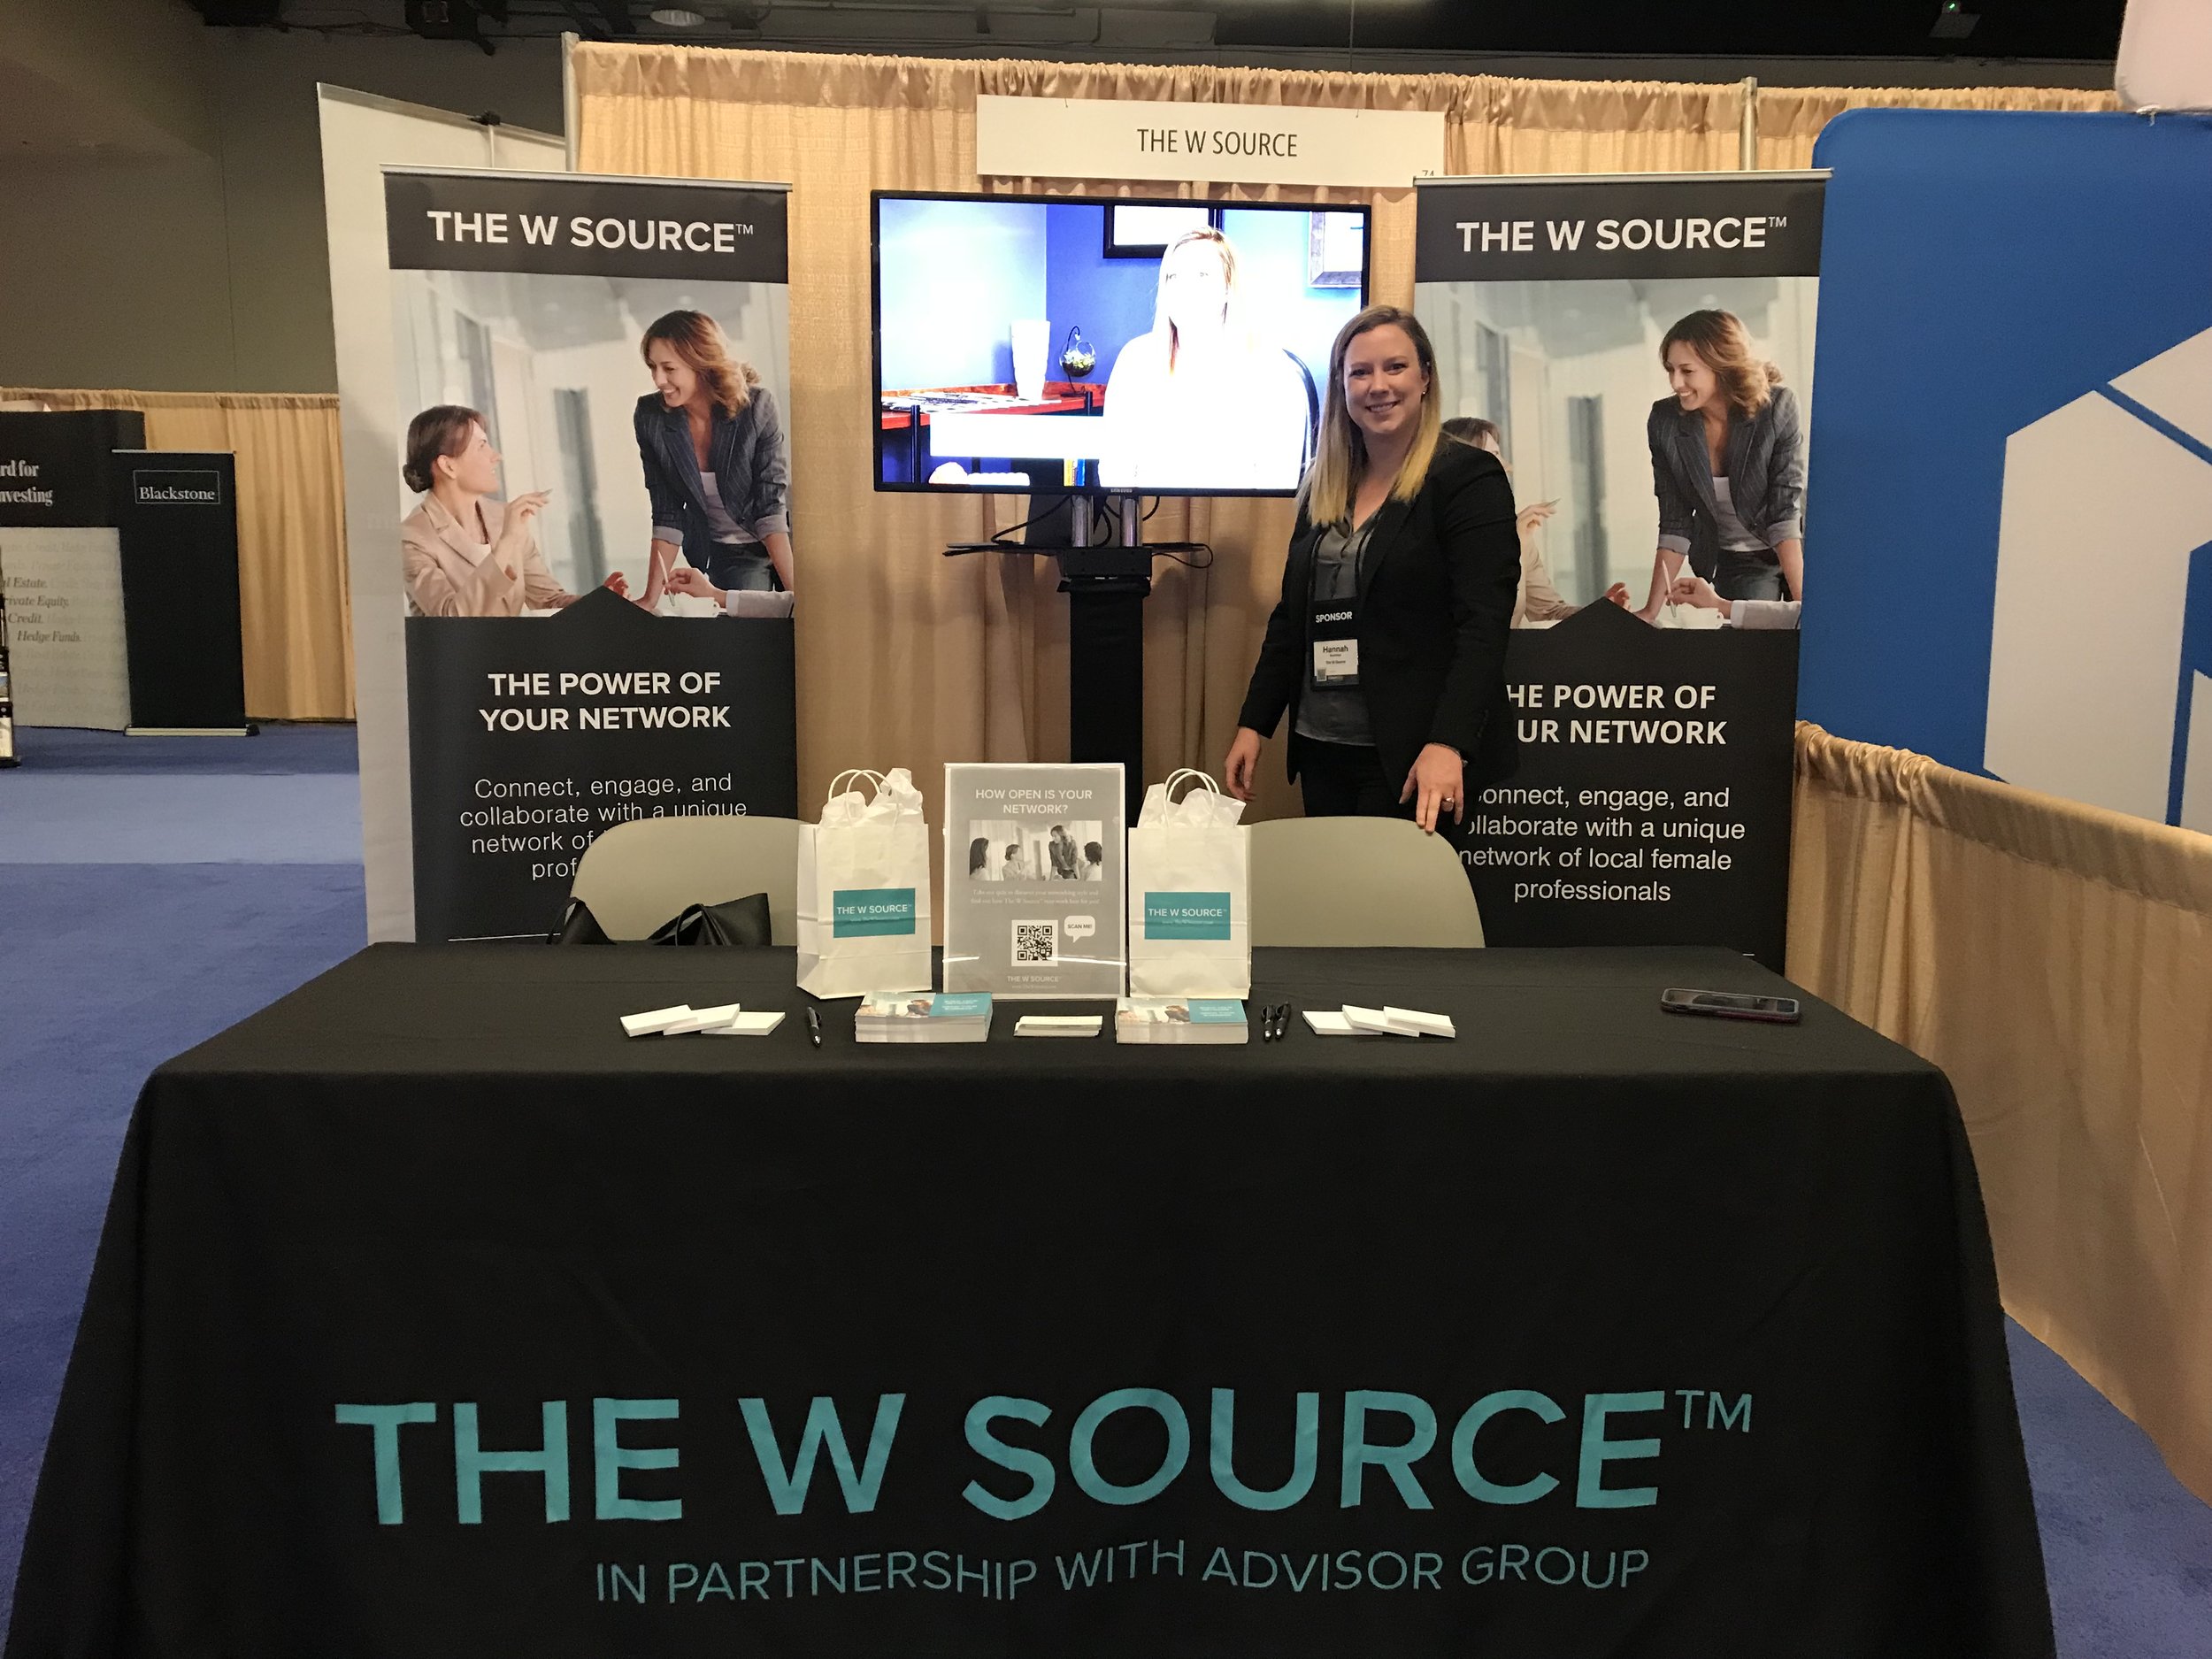  Cofounder of The W Source™ at The W Source™ booth ready to greet Advisor Group ConnectEd attendees. 